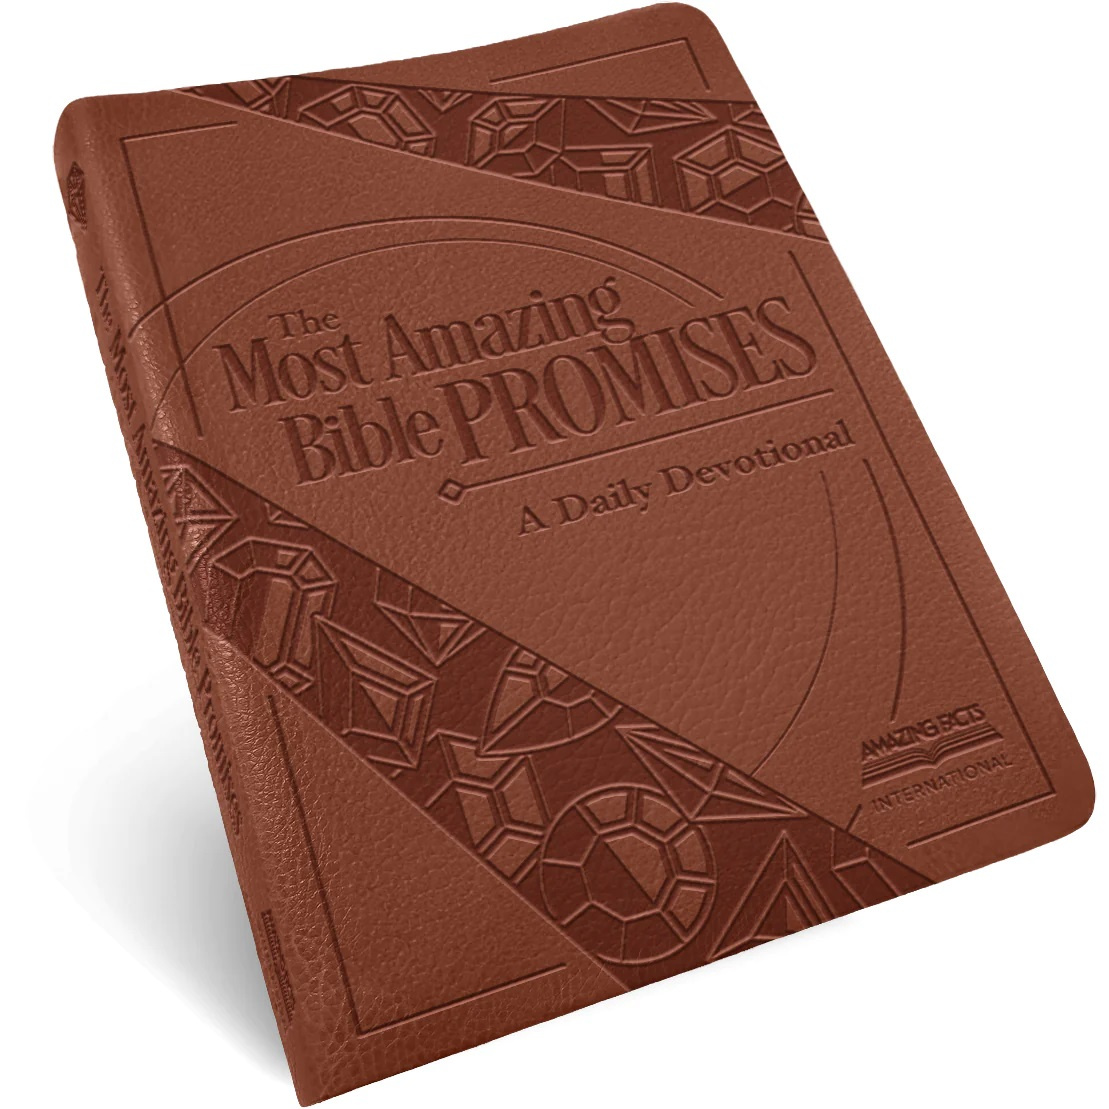 The Most Amazing Bible promises, a Daily Devotional